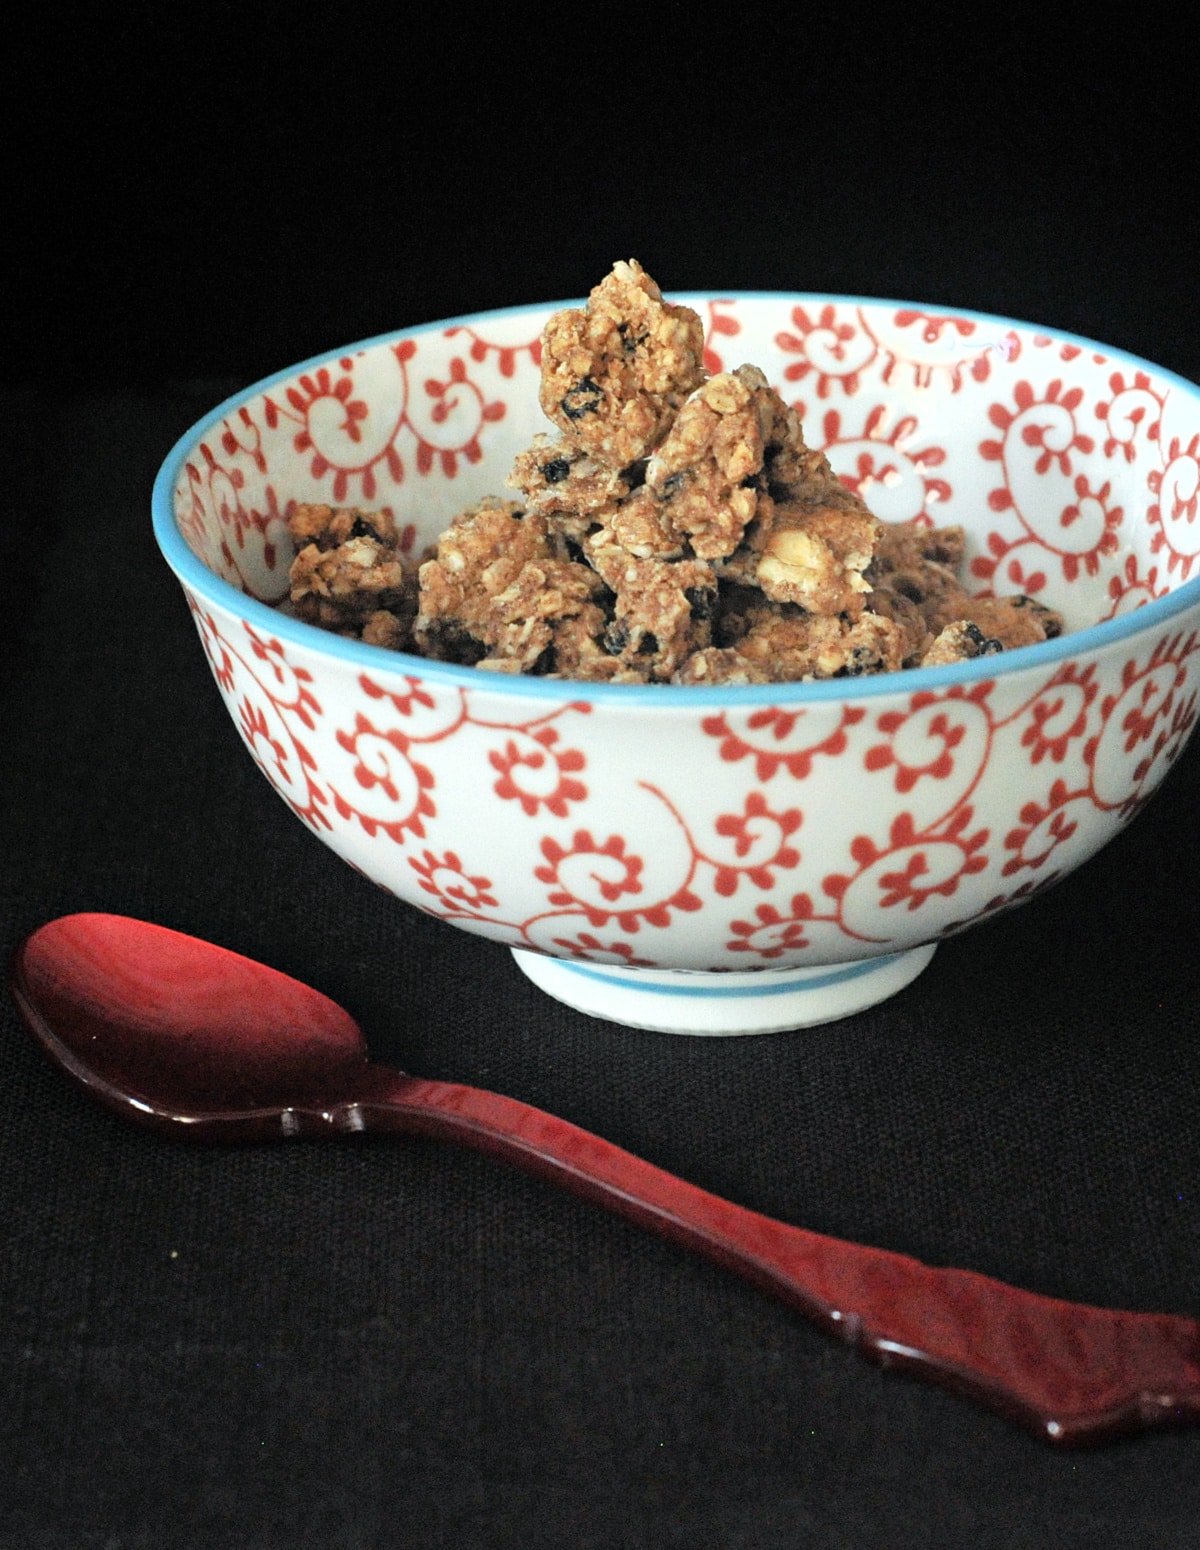 Oatmeal raisin cookie granola in a red and white cereal bowl, a red spoon next to bowl.